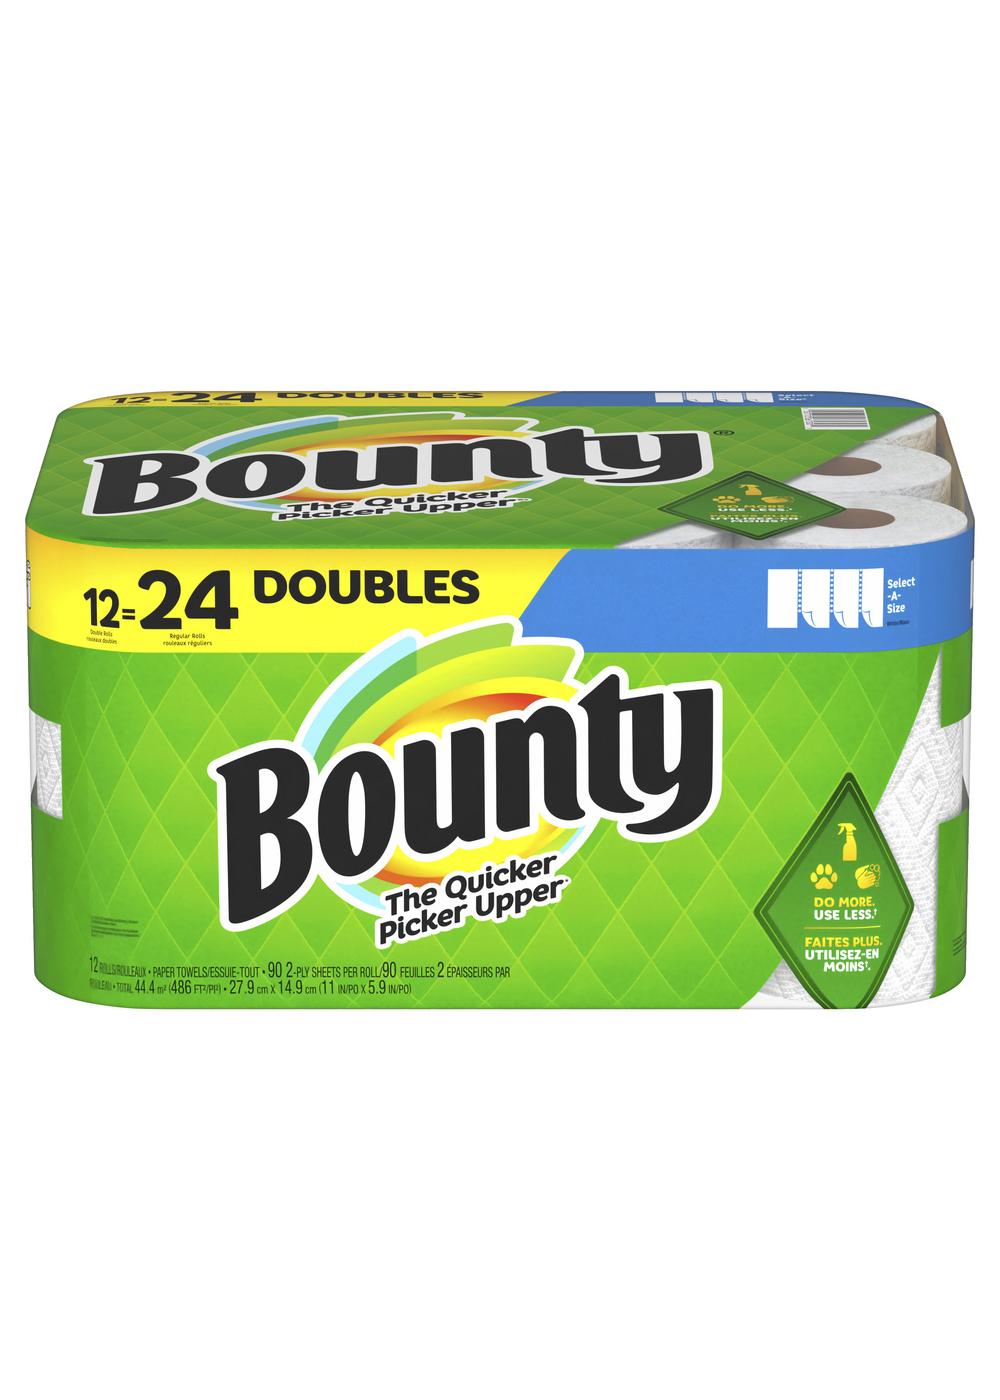 Bounty Essentials, White, Select-a-Size Paper Towels (12 Double